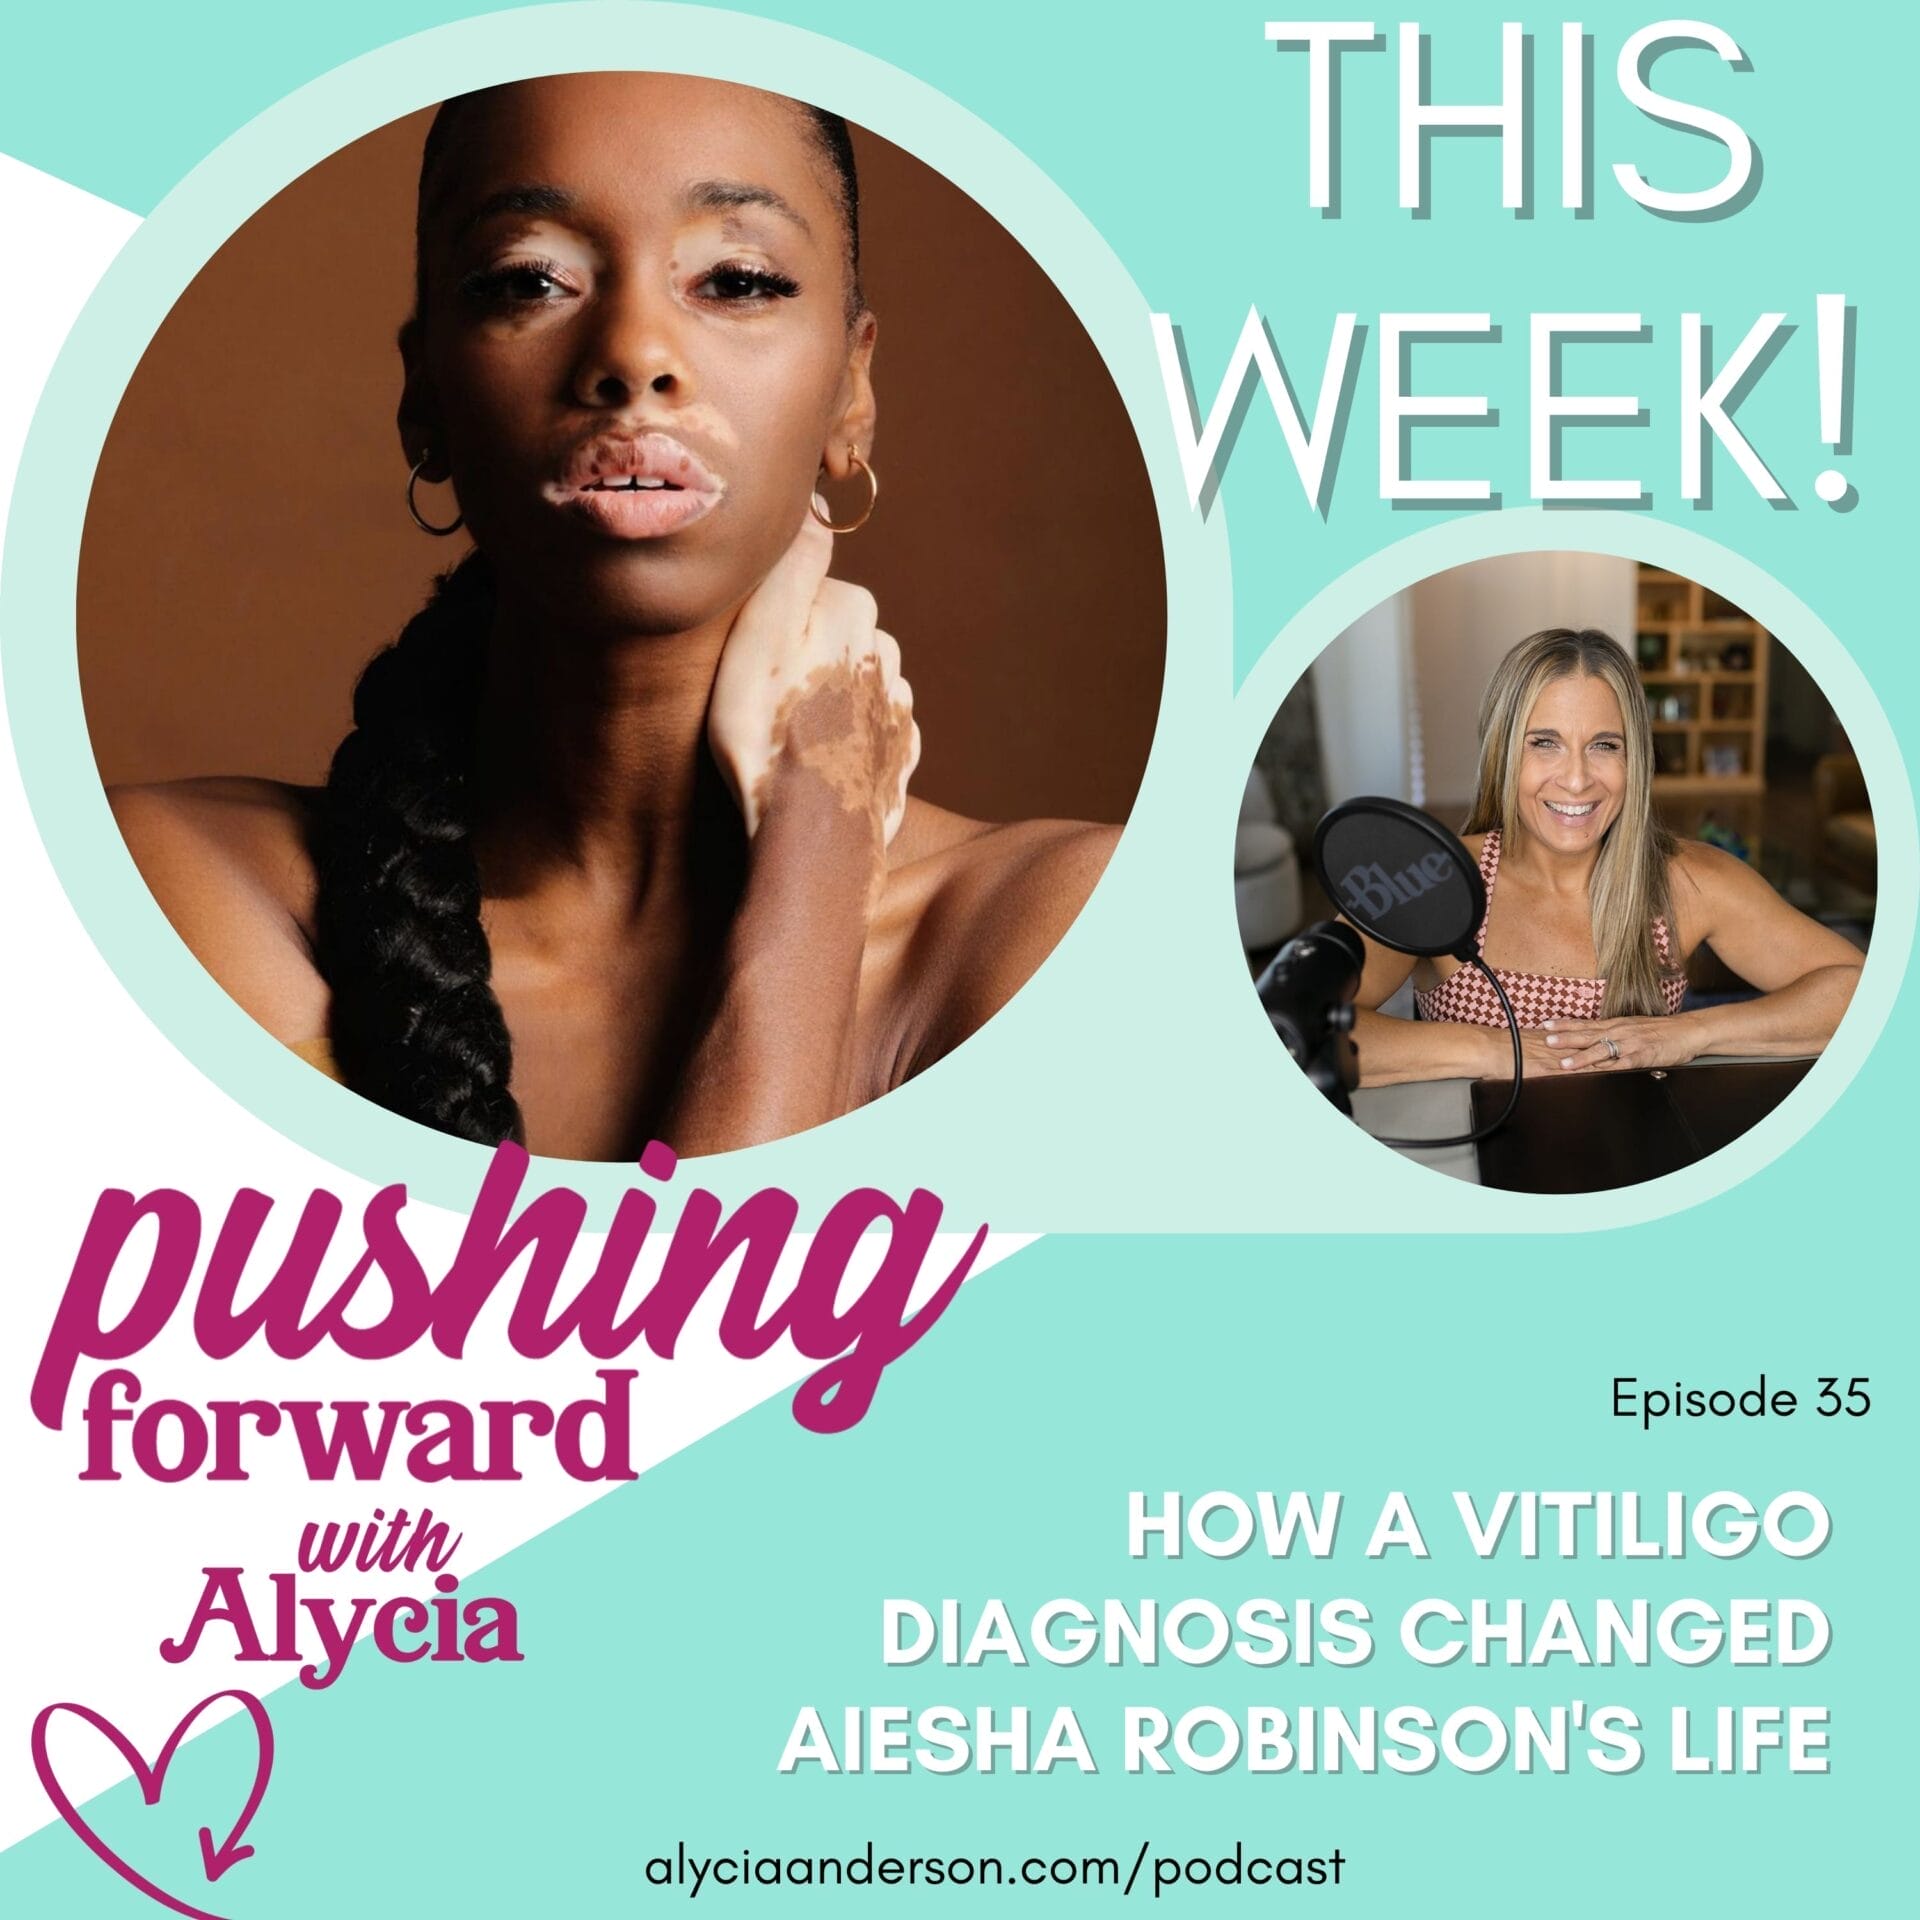 Pushing Forward with Alycia featuring Aiesha Robinson episode thirty five teaser in teal and white